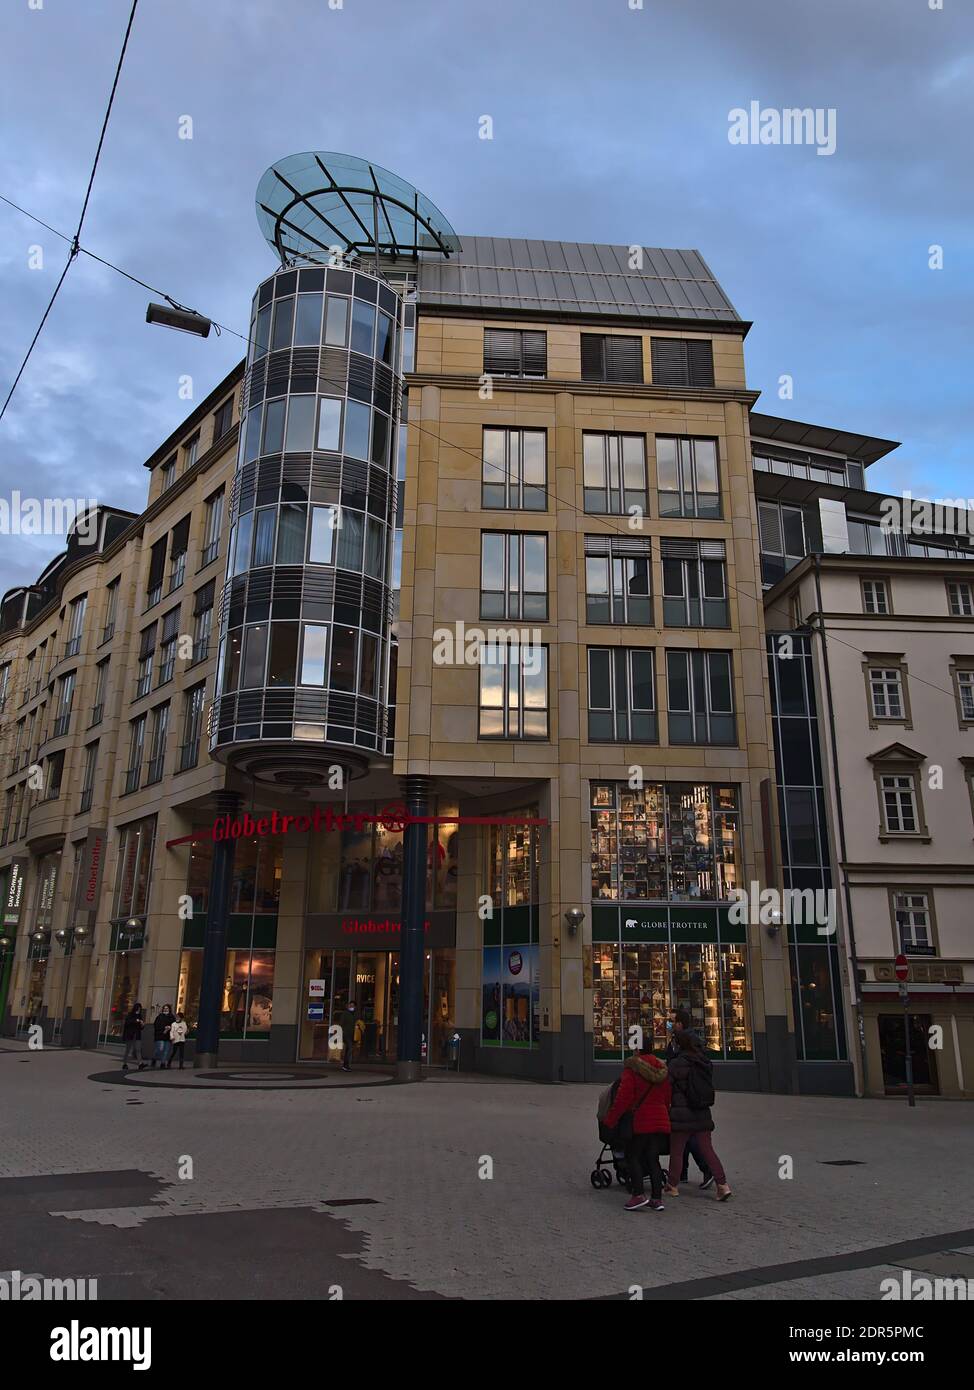 Front view of closed branch of Globetrotter, a German retailer for outdoor products, in shopping street Tübinger Straße with people wearing face masks. Stock Photo